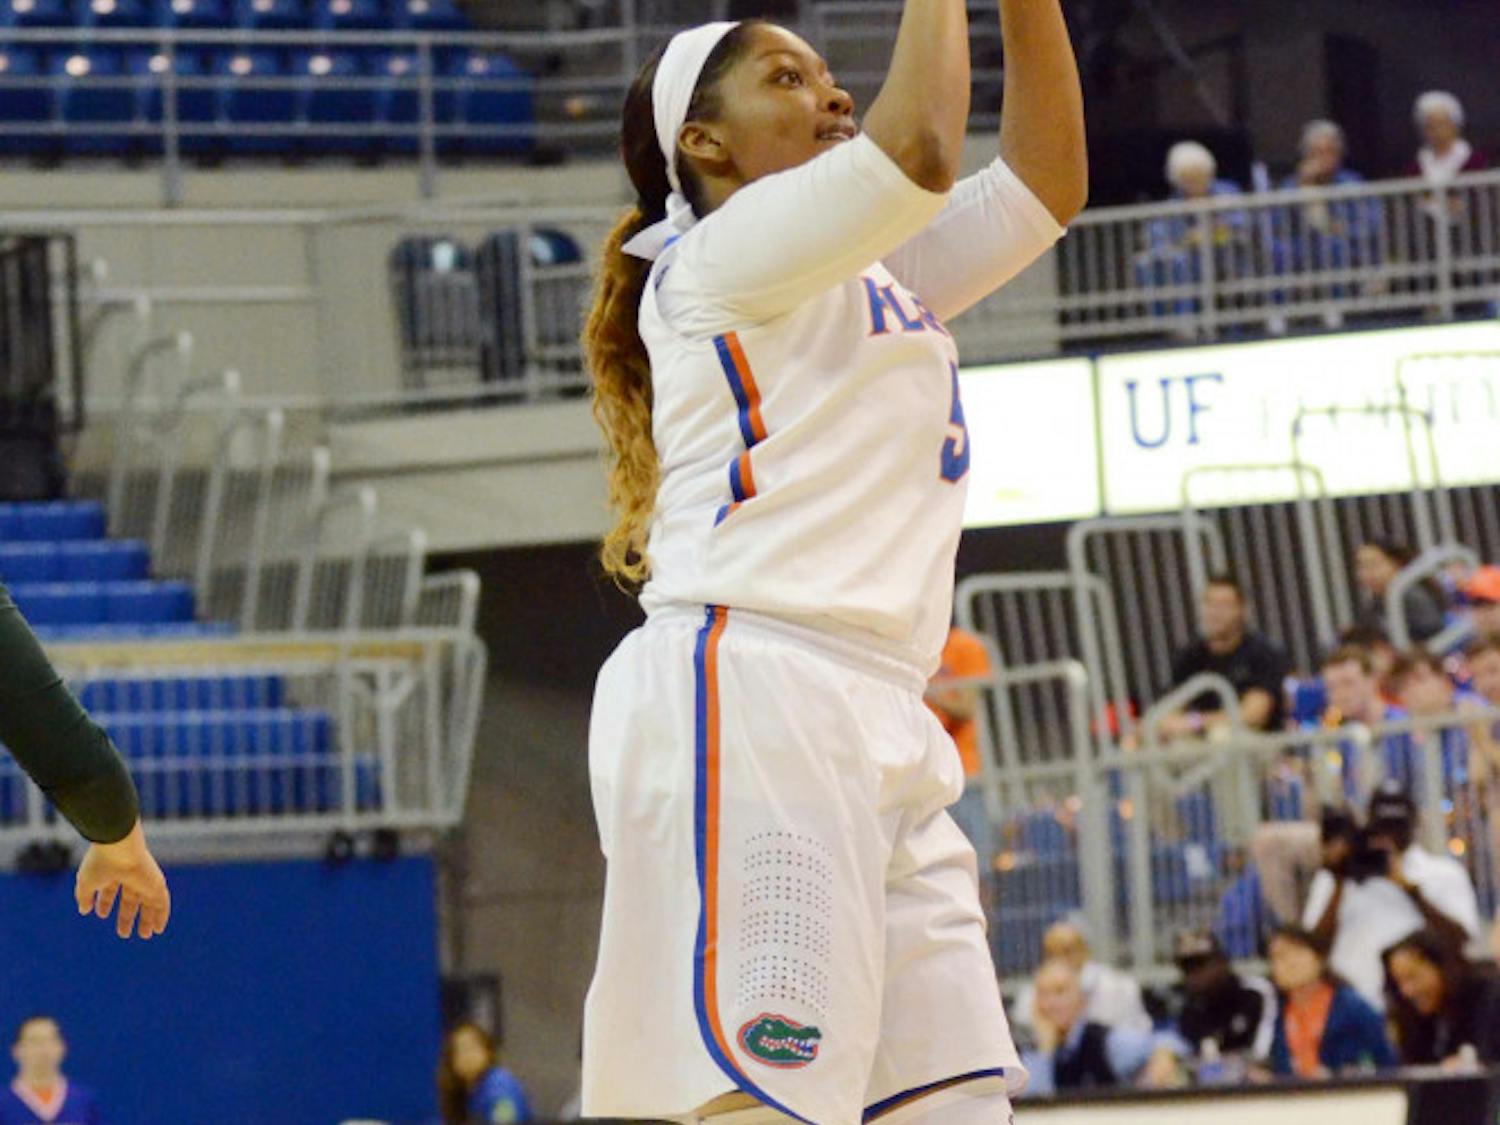 Antoinette Bannister attempts a jump shot during Florida's season-opening win against Jacksonville.